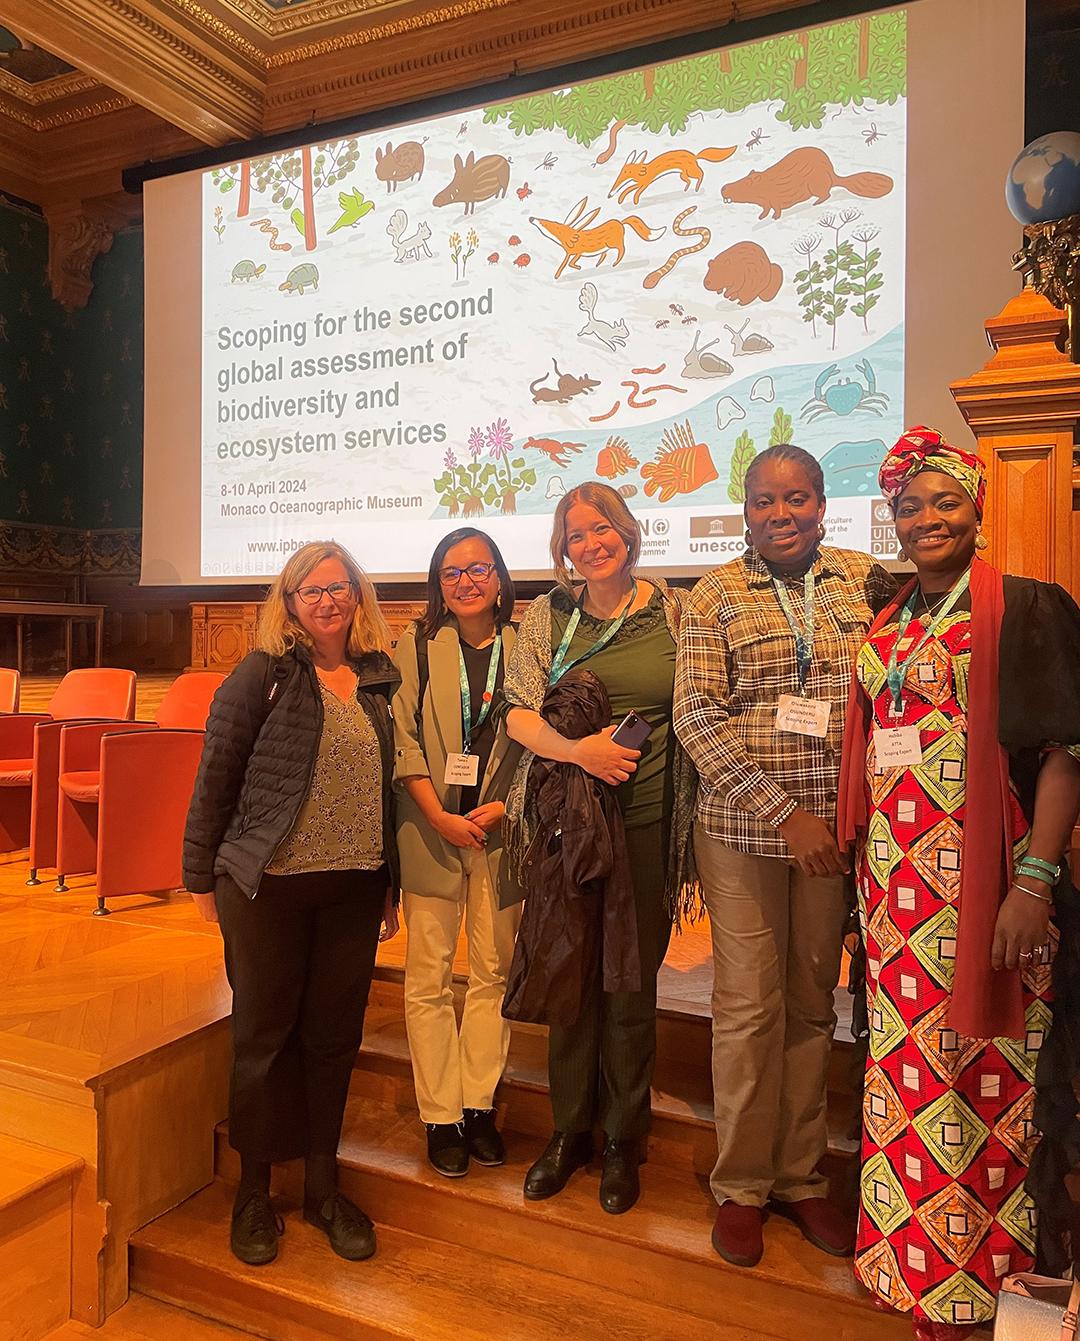 Prof Helen Roy on the left and fellow scoping experts on the second IPBES global assessment